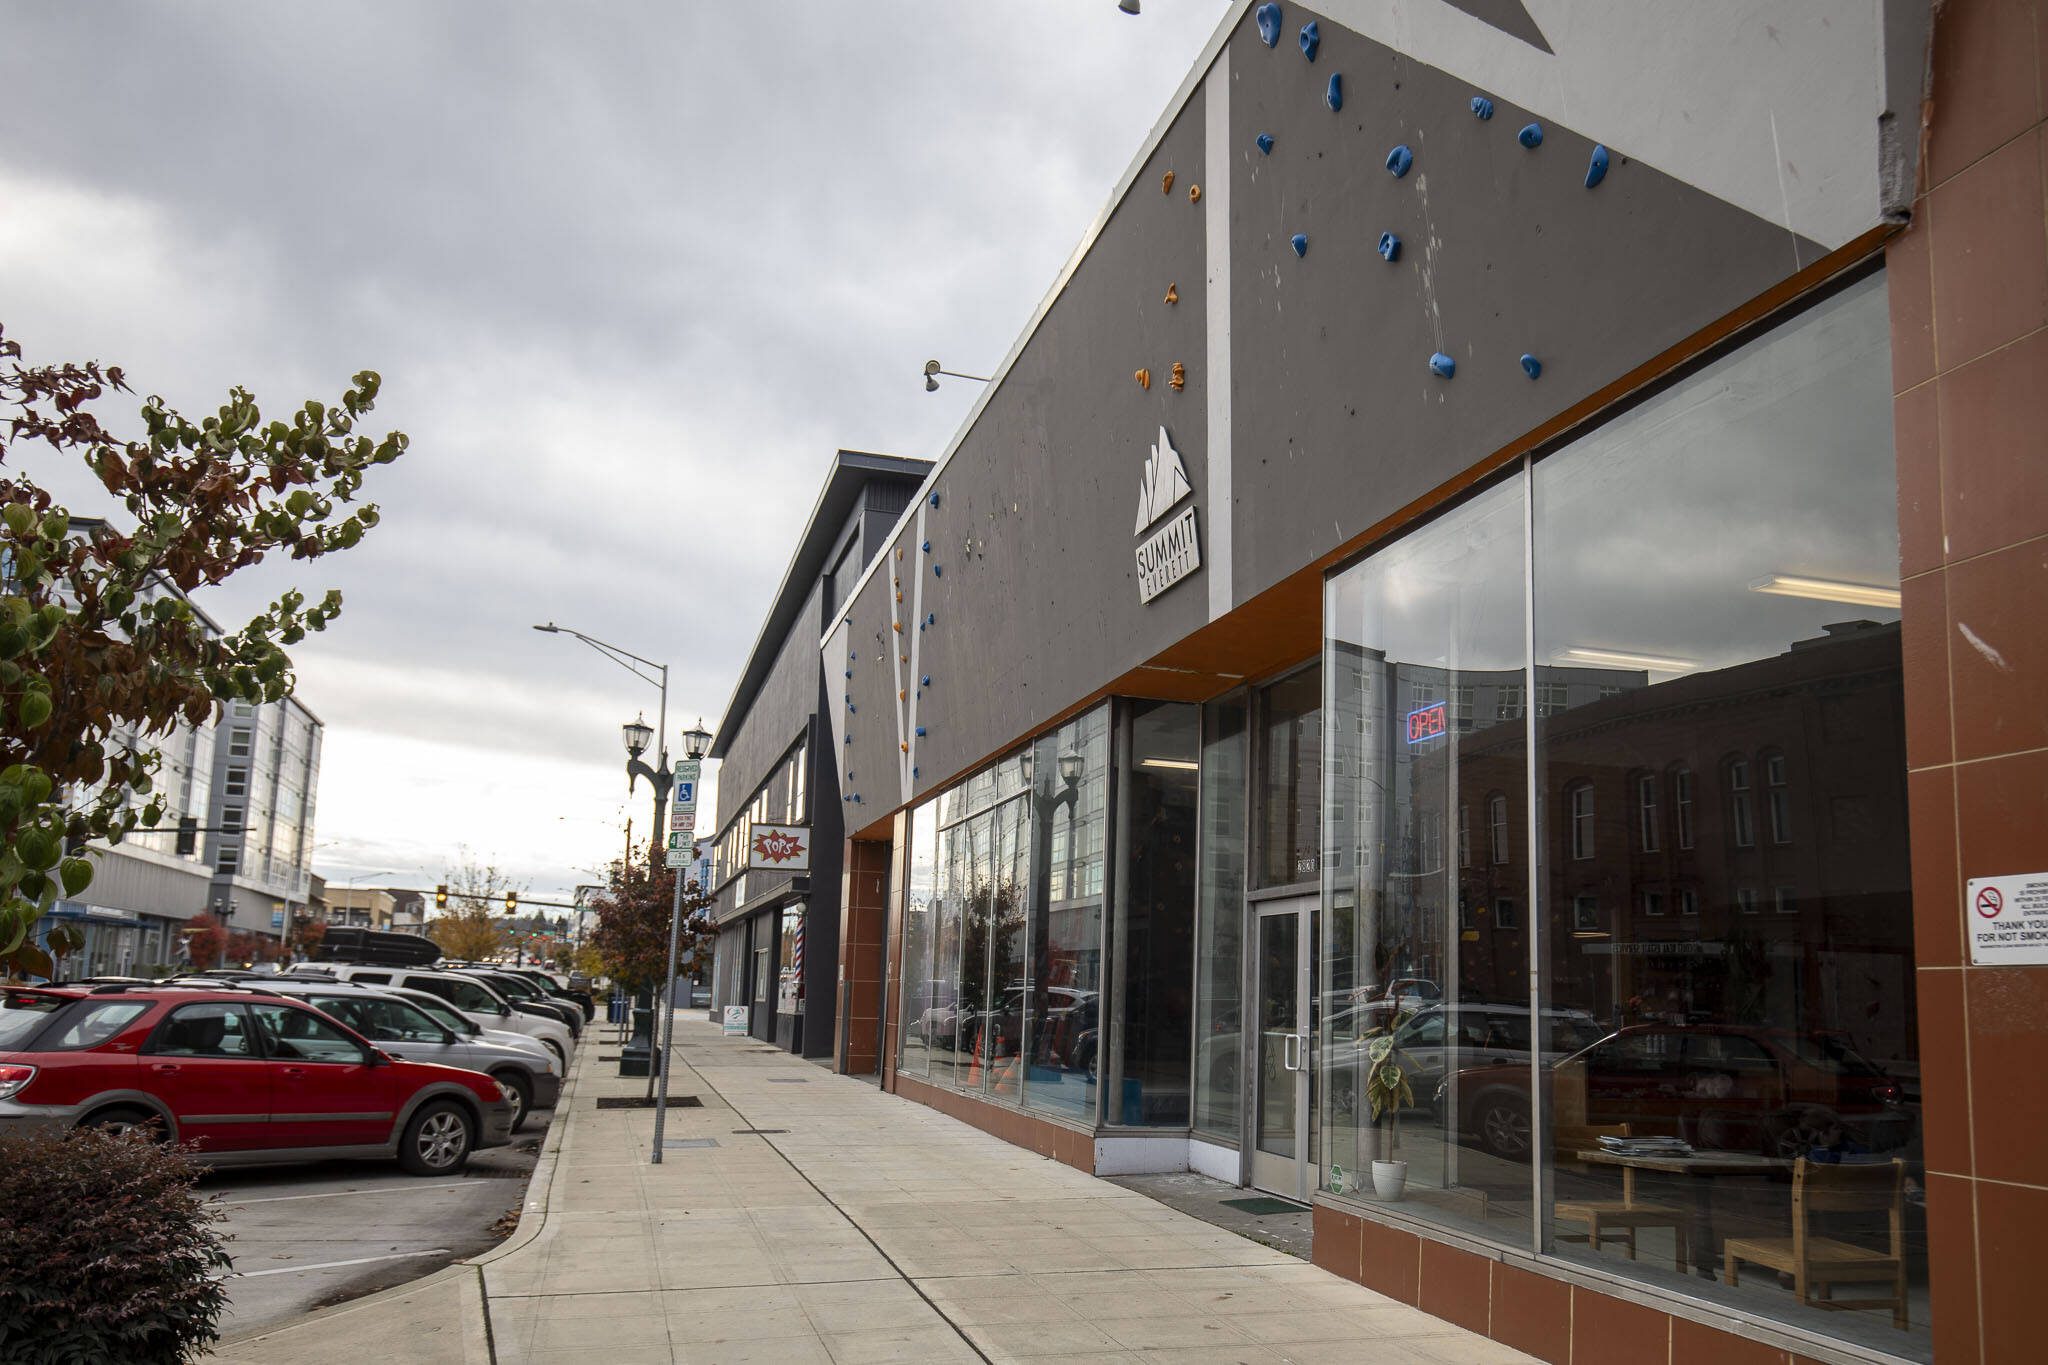 Summit Everett, a rock climbing gym, in Everett, Washington on Wednesday, Nov. 15, 2023. Summit will move into the former Grand Avenue Marketplace space, a retail location that has been vacant for five years. (Annie Barker / The Herald)